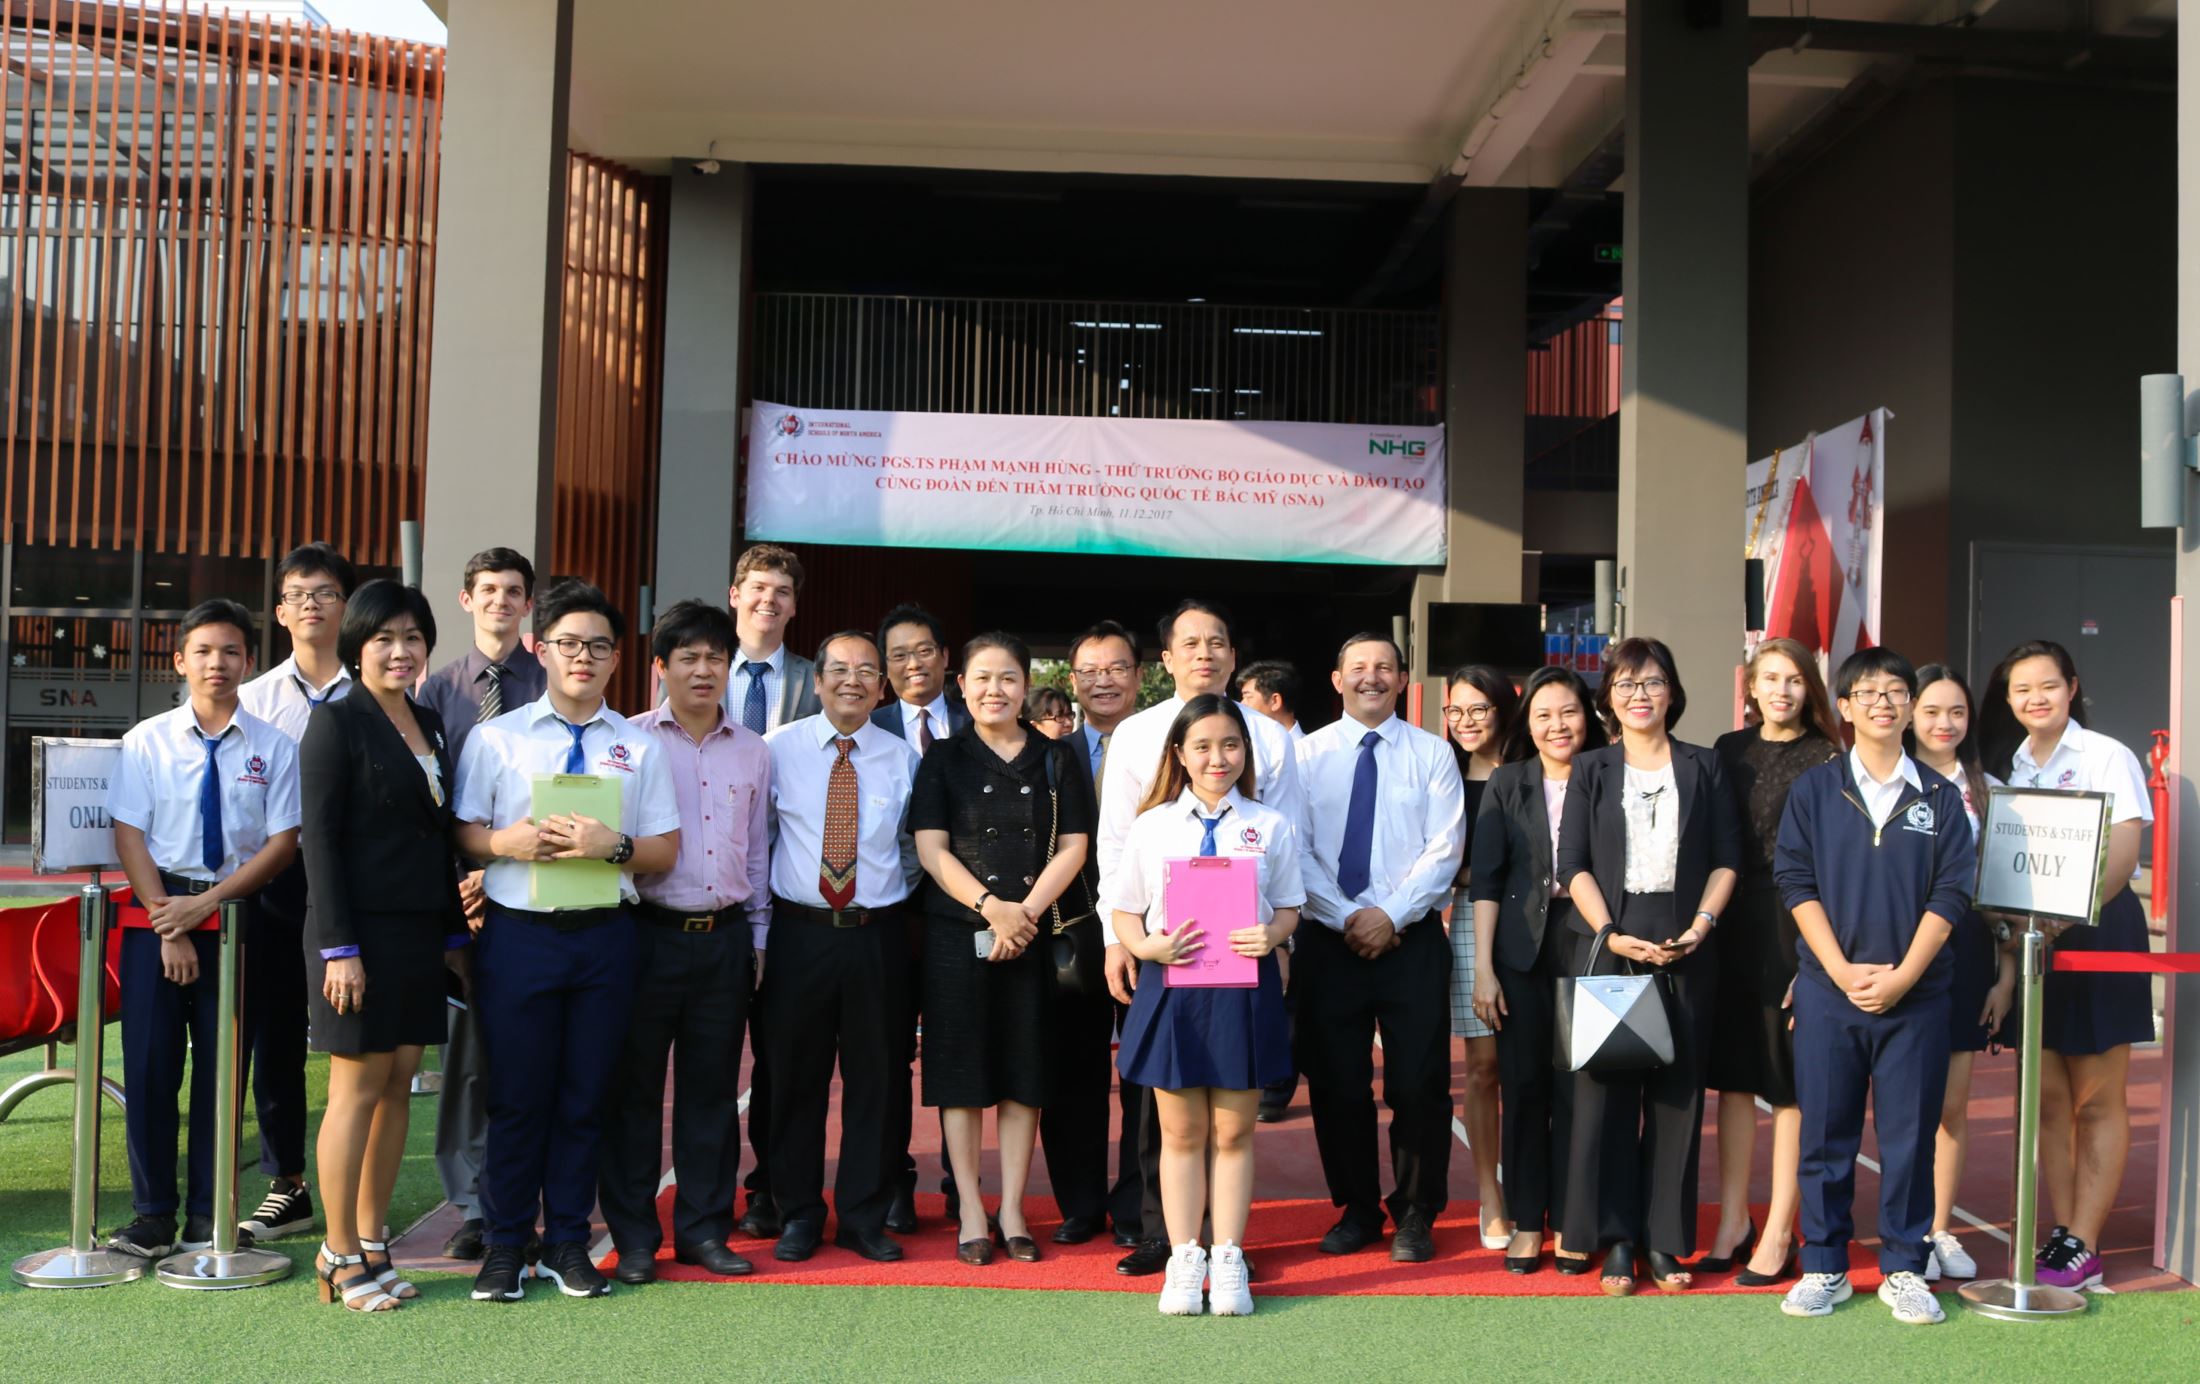 ssoc.Prof.Dr.Pham Manh Hung - Deputy Minister of Education and Training took memorial pictures with SNA leaders